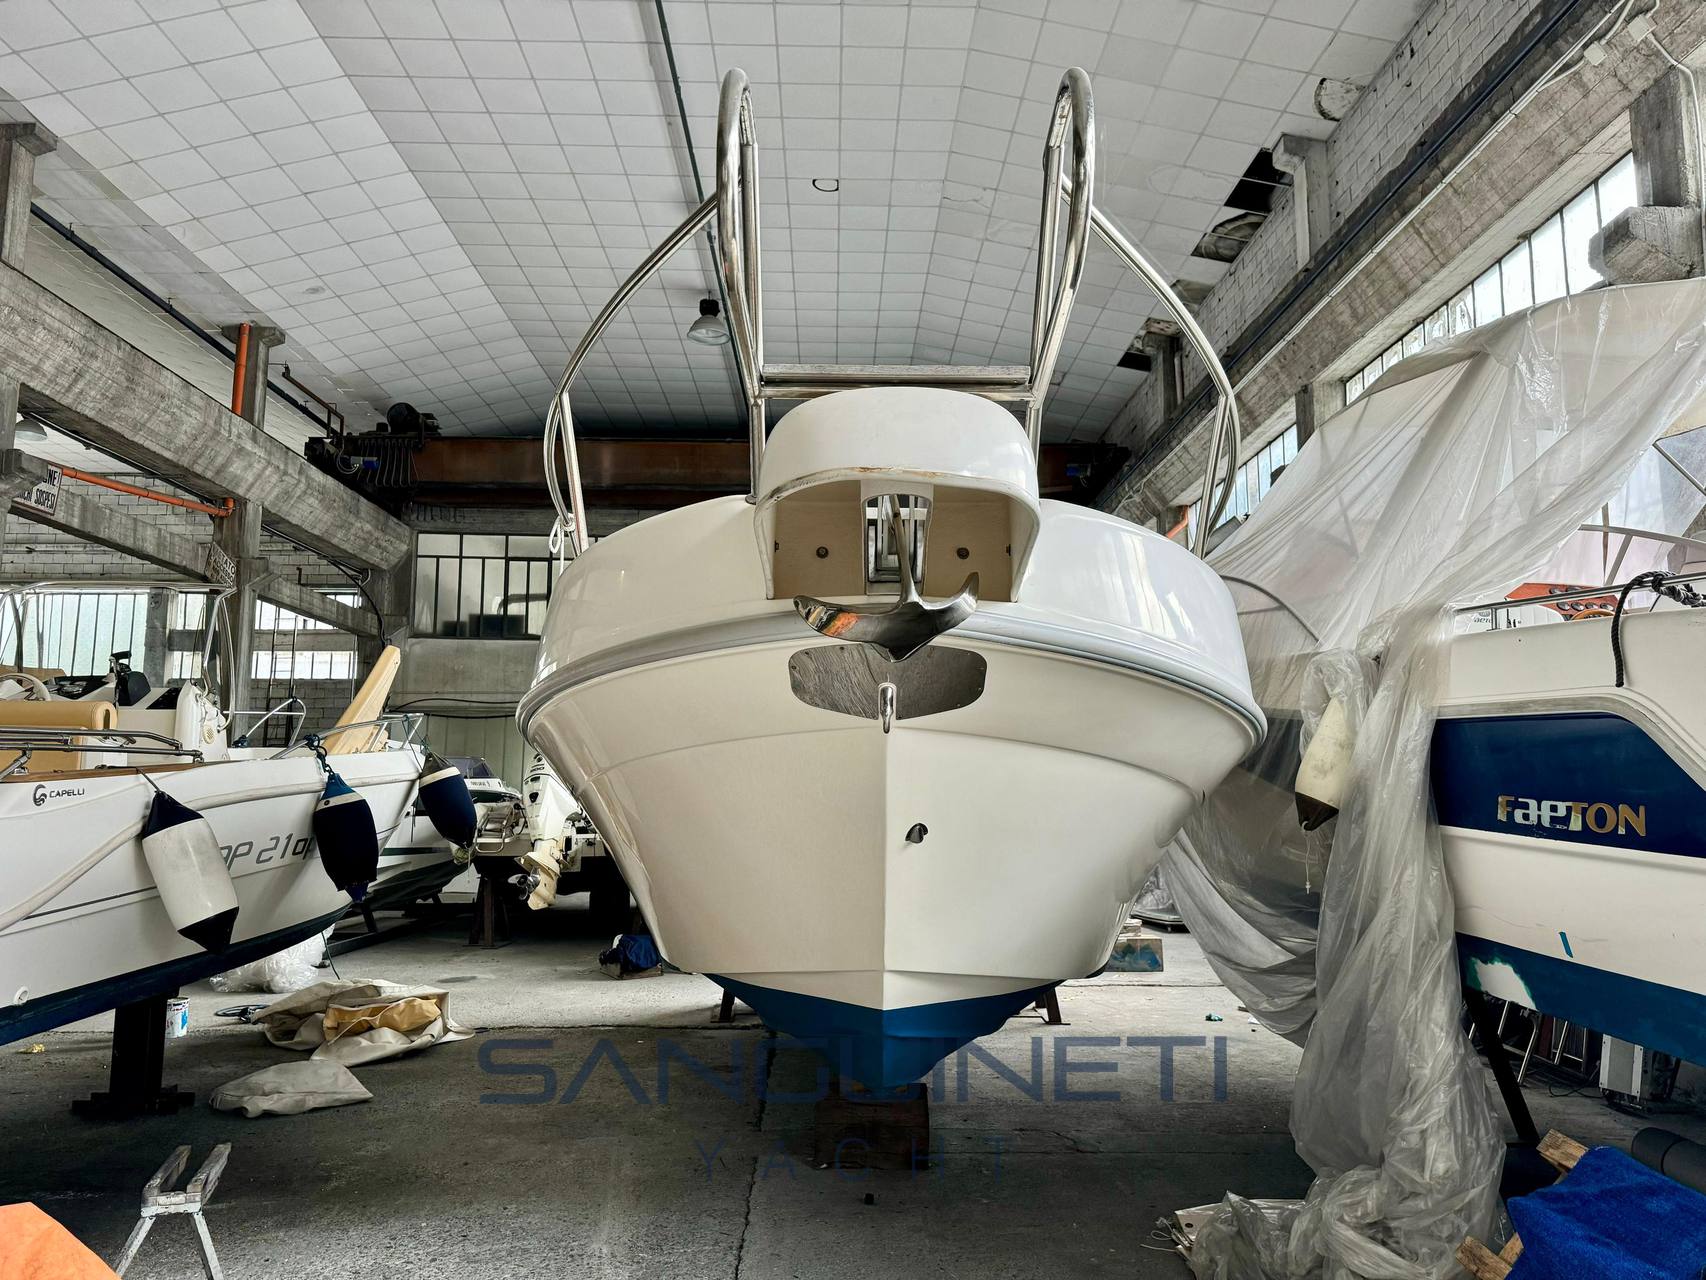 Capelli 27 Motor boat used for sale